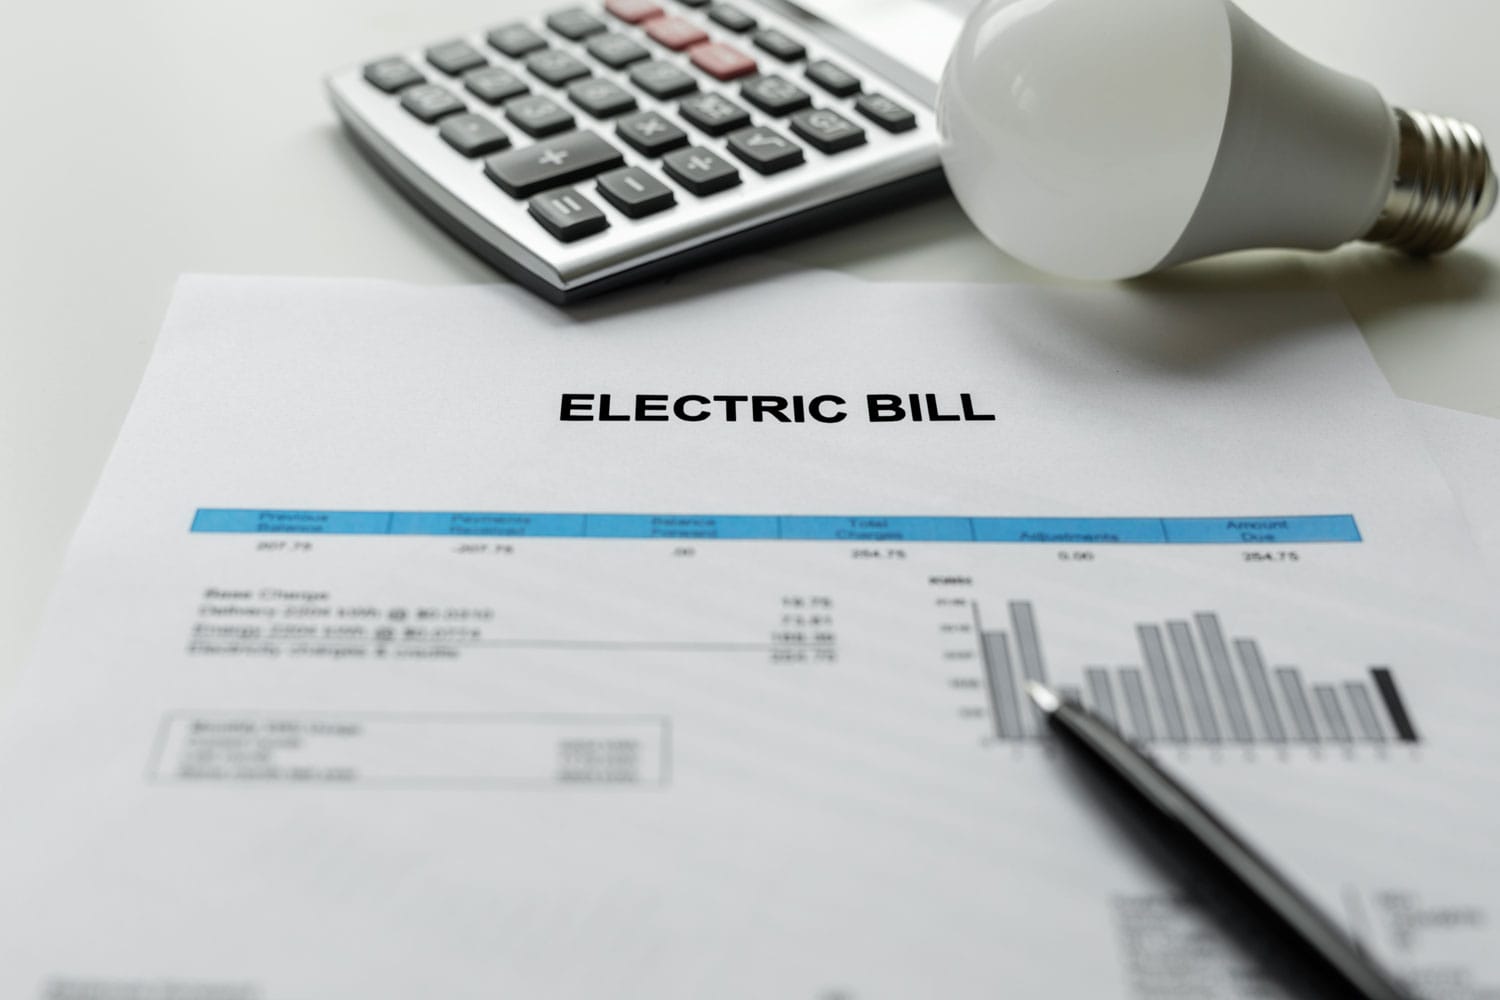 Electric bills with calculator on the side